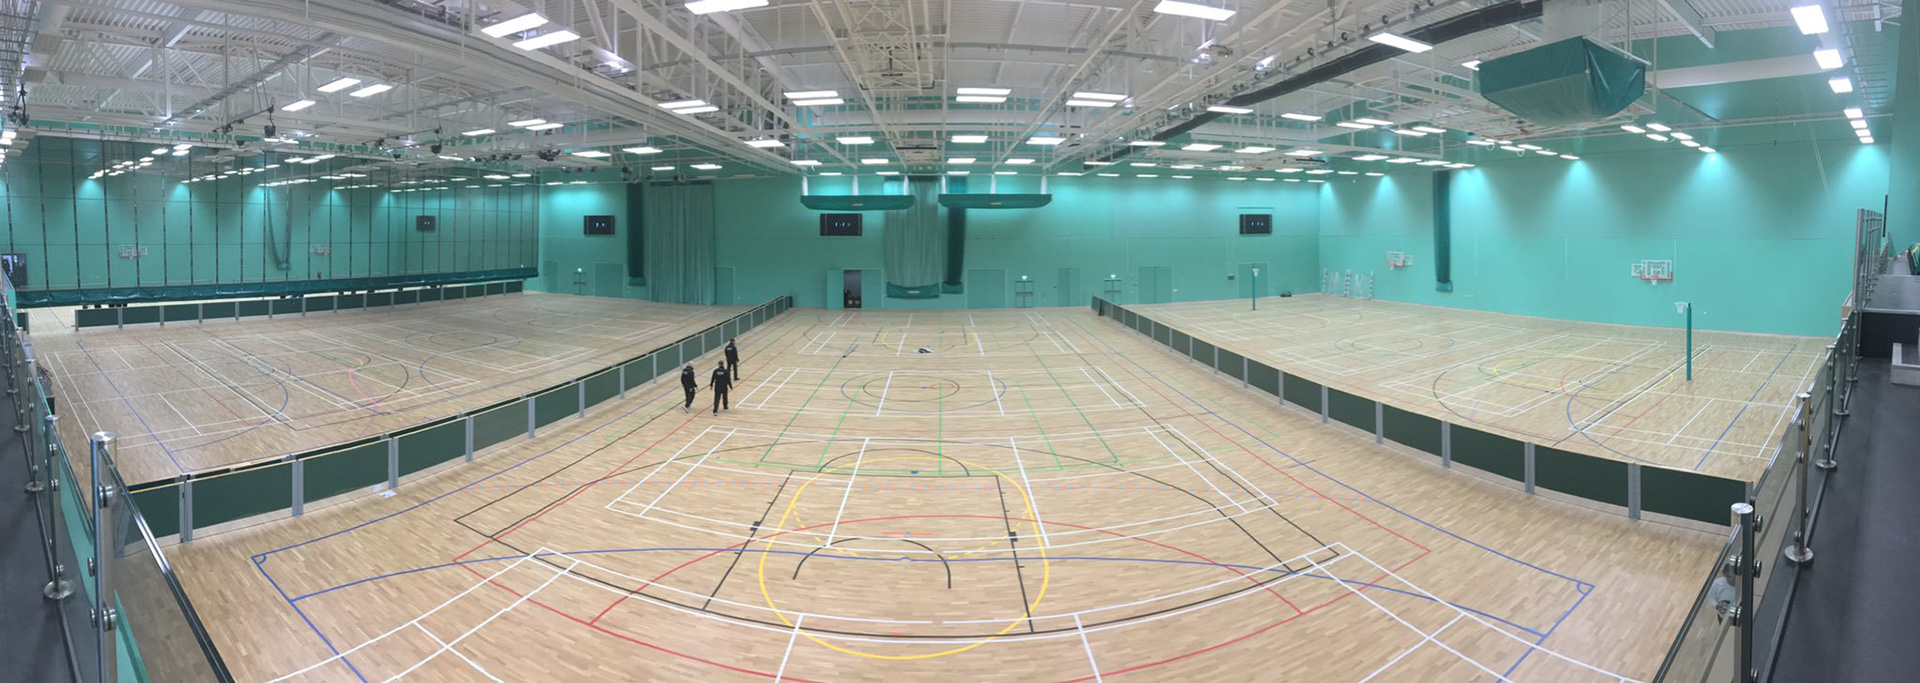 Largest sports hall project. Ever.